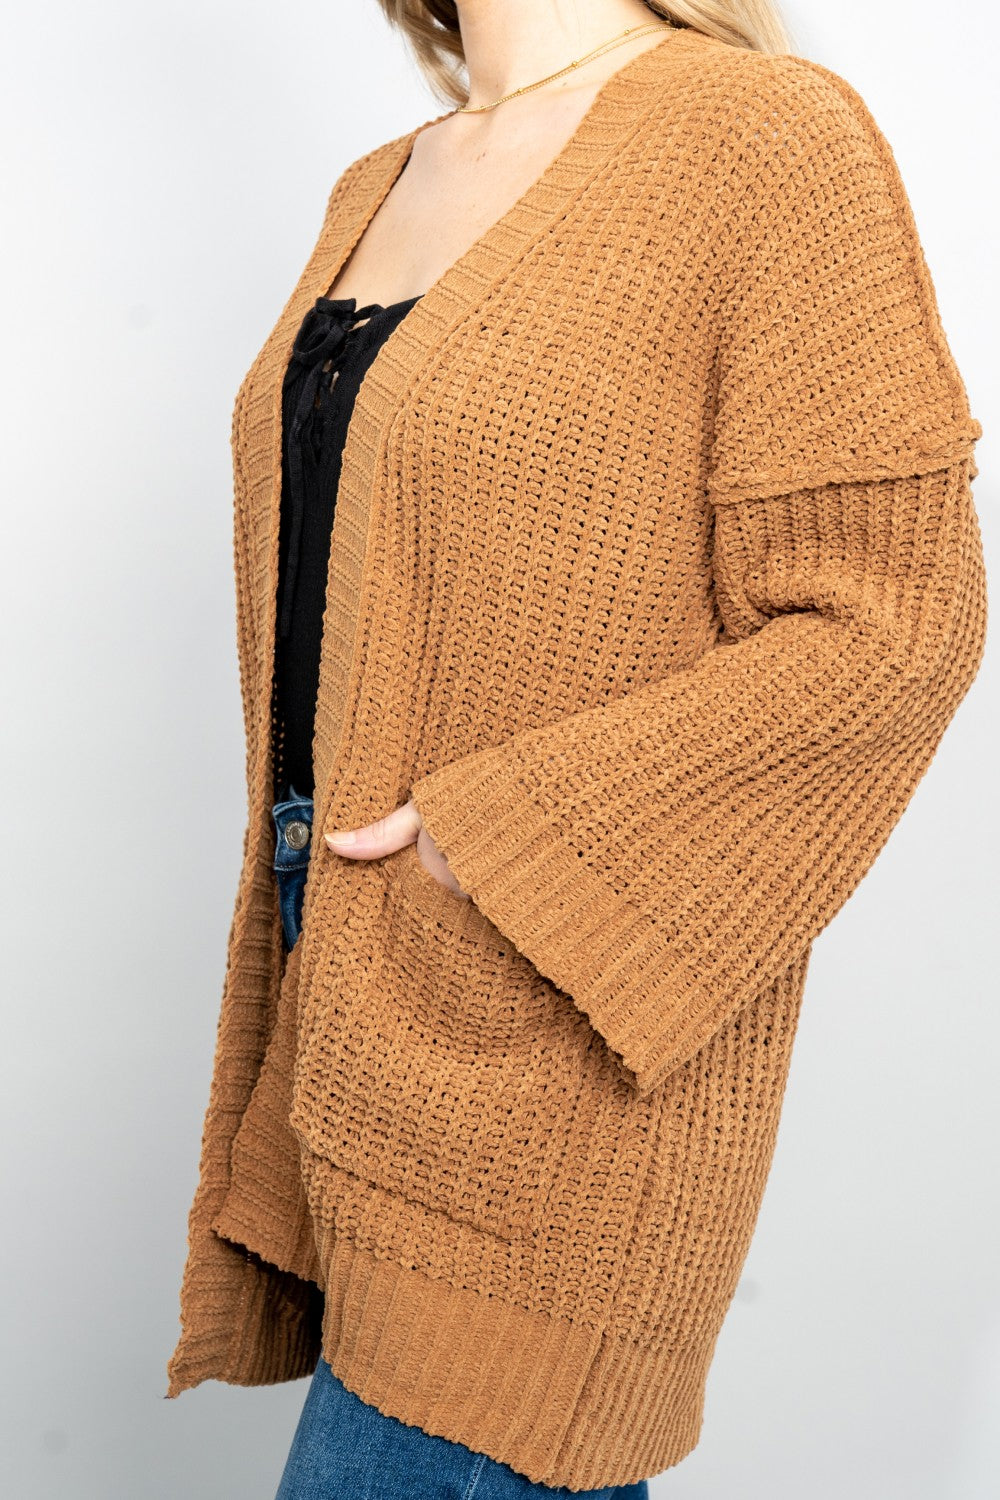 Very J Exposed Seam Flare Sleeve Open Front Cardigan in Camel